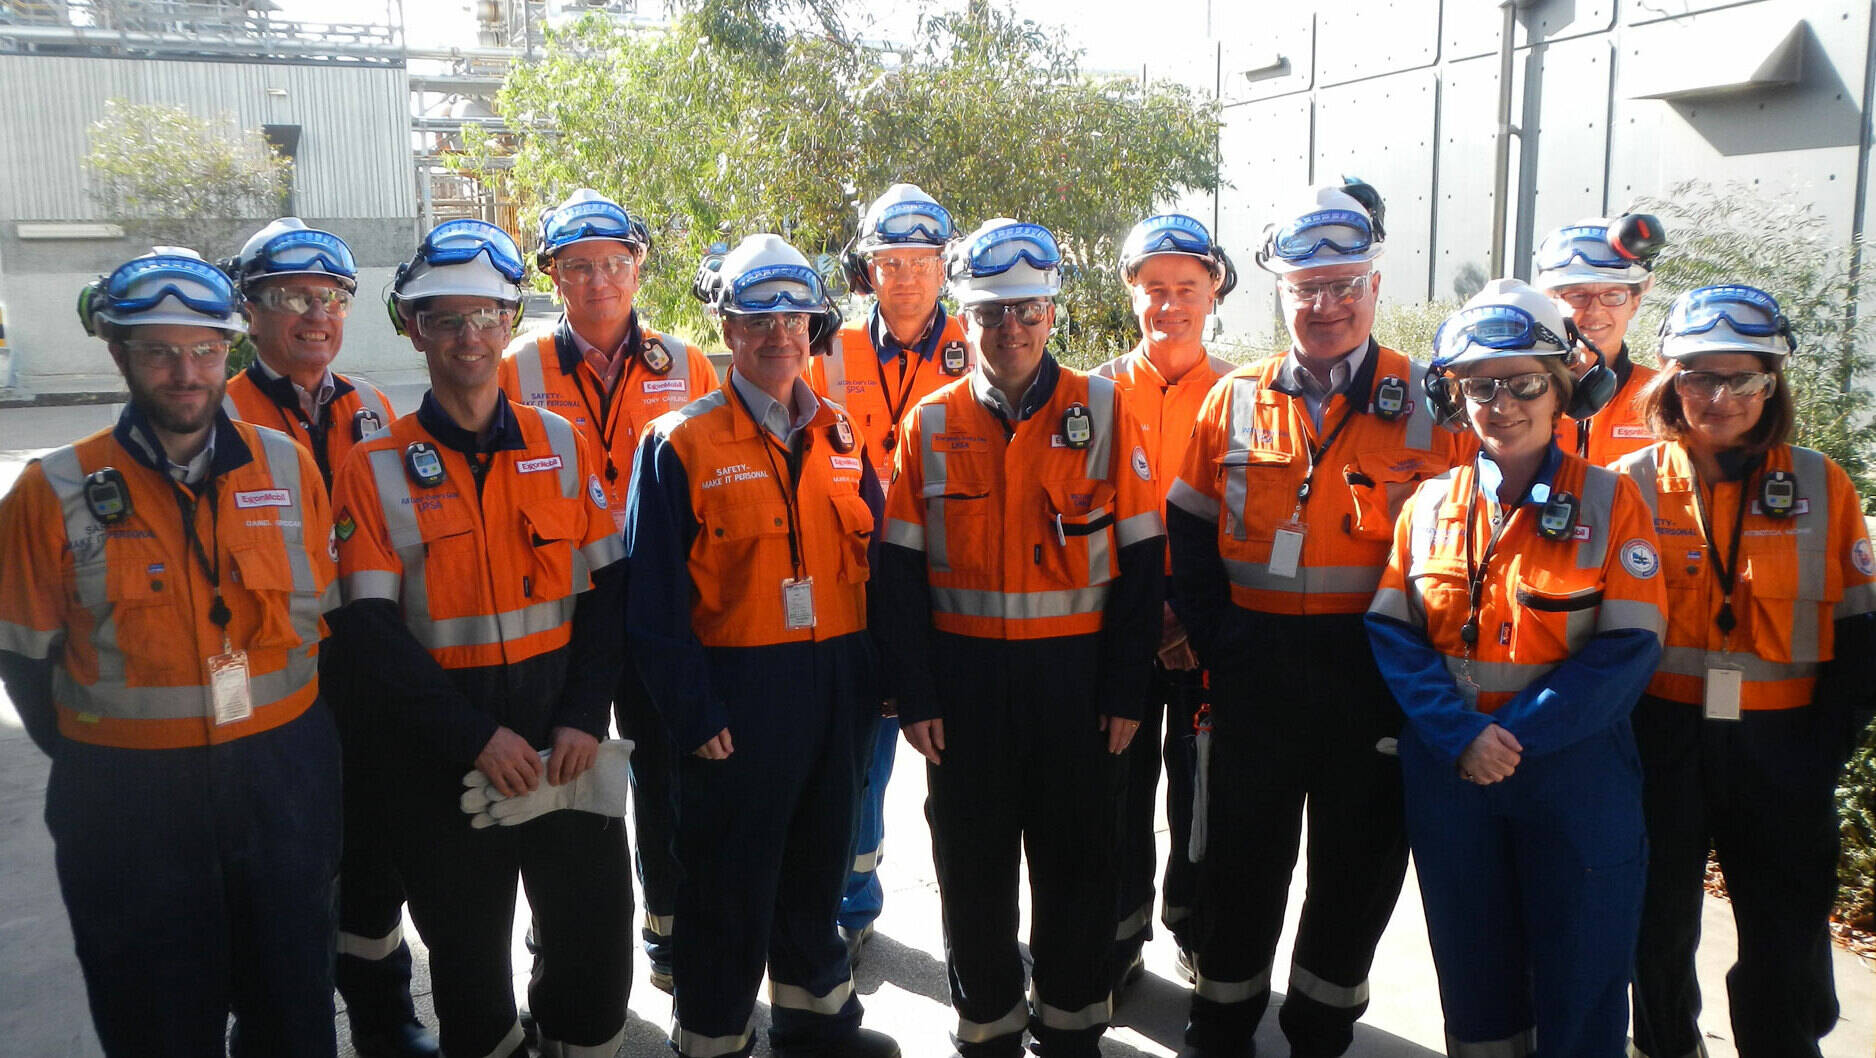 Image Photo Altona Refinery Manager Riccardo Cavallo said the visit also provided a chance to demonstrate ExxonMobils commitment to Altona Refinery and wider supply chain via its ongoing investment.